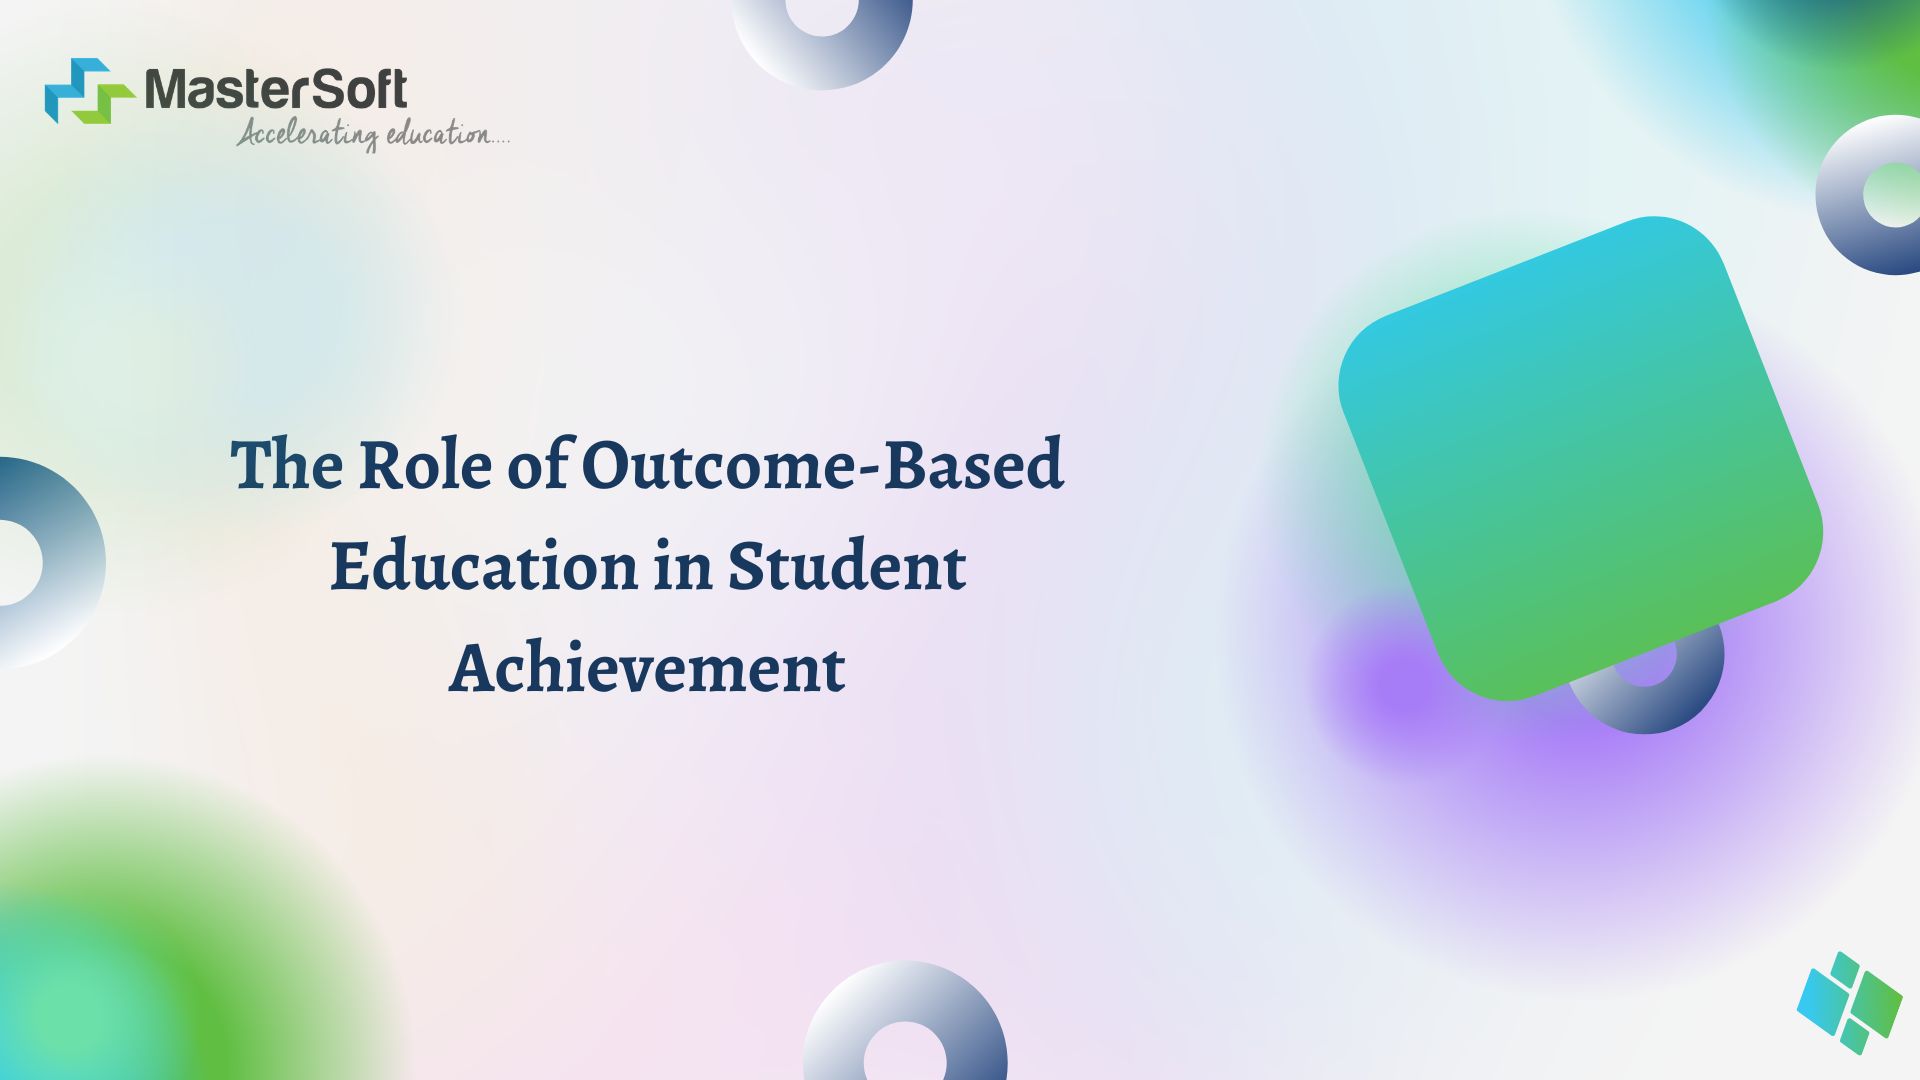 The Role of Outcome-Based Education in Student Achievement